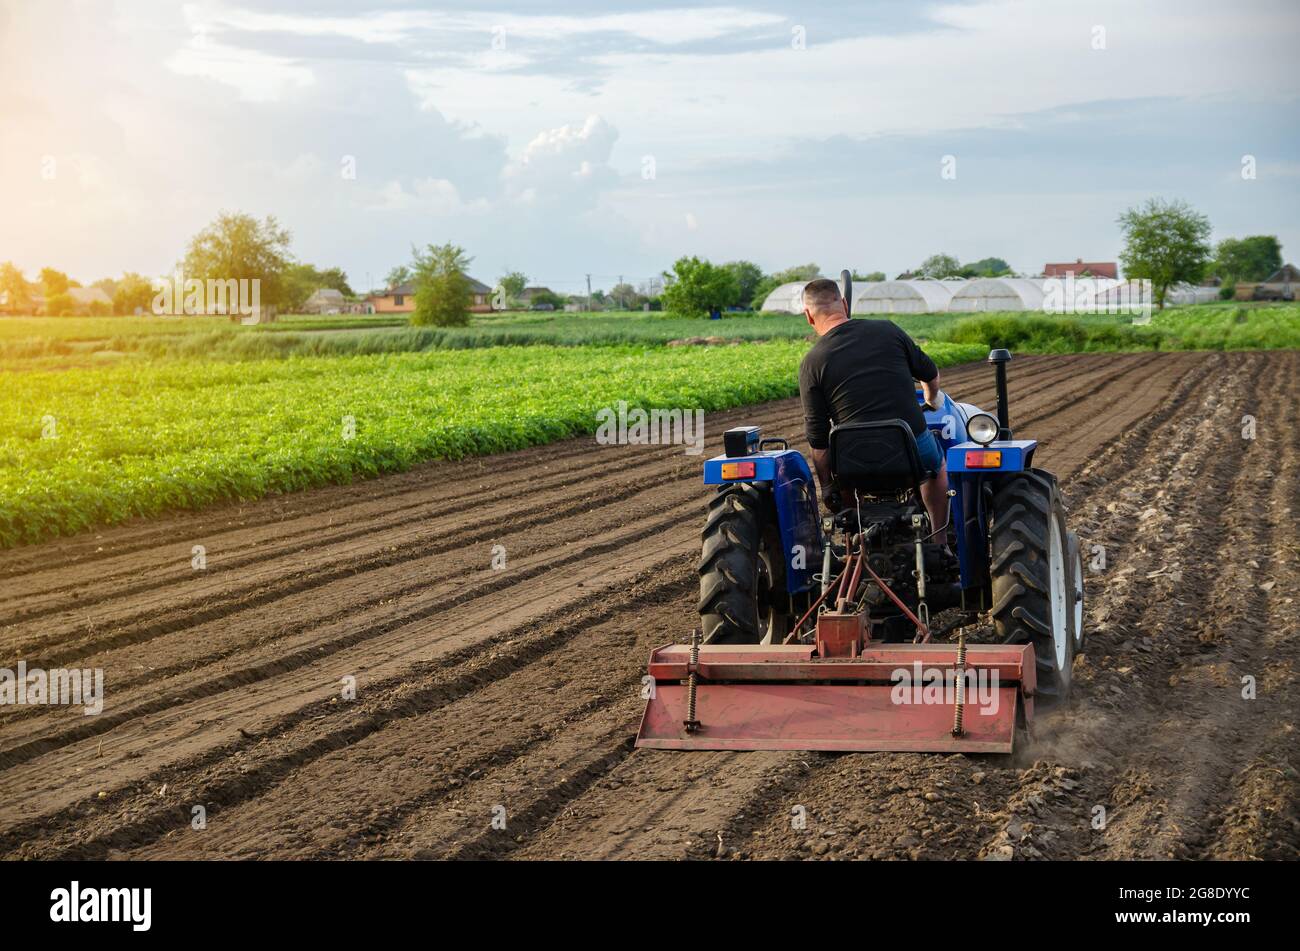 A farm tractor works the soil of an agricultural field. Milling soil, crushing and loosening ground before cutting rows. Working as a farmer. Farming. Stock Photo